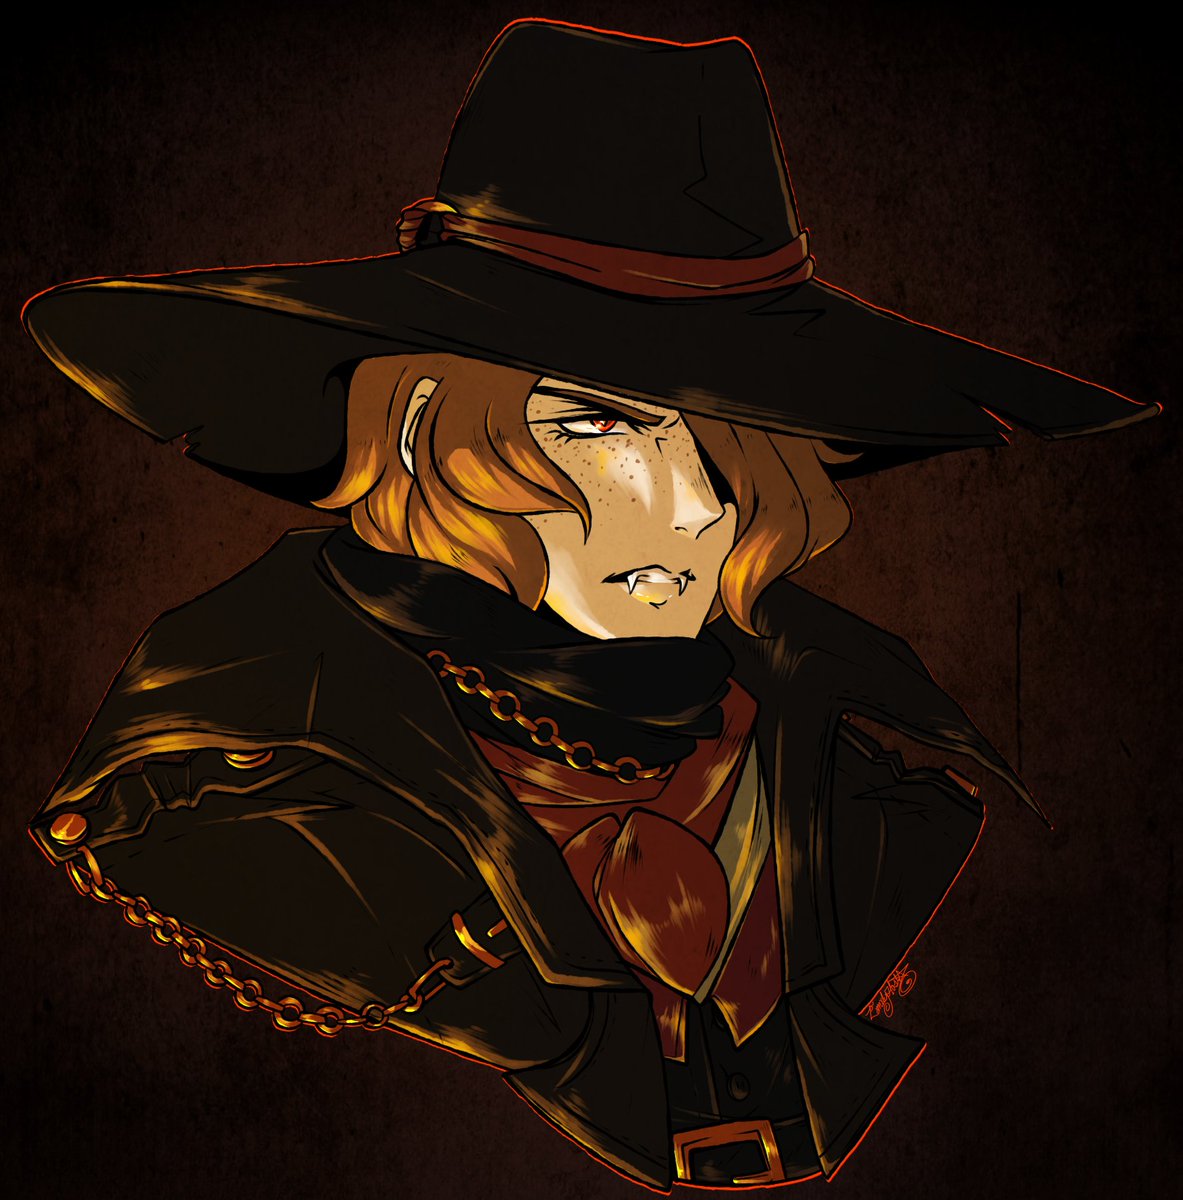 My obsession with big hats and grumpy men continues! Little mini-draw of my #ShadowoftheDemonLord character, Duncan, giving him a new look for the new game we are playing. He's an angry doofus with a big sword.